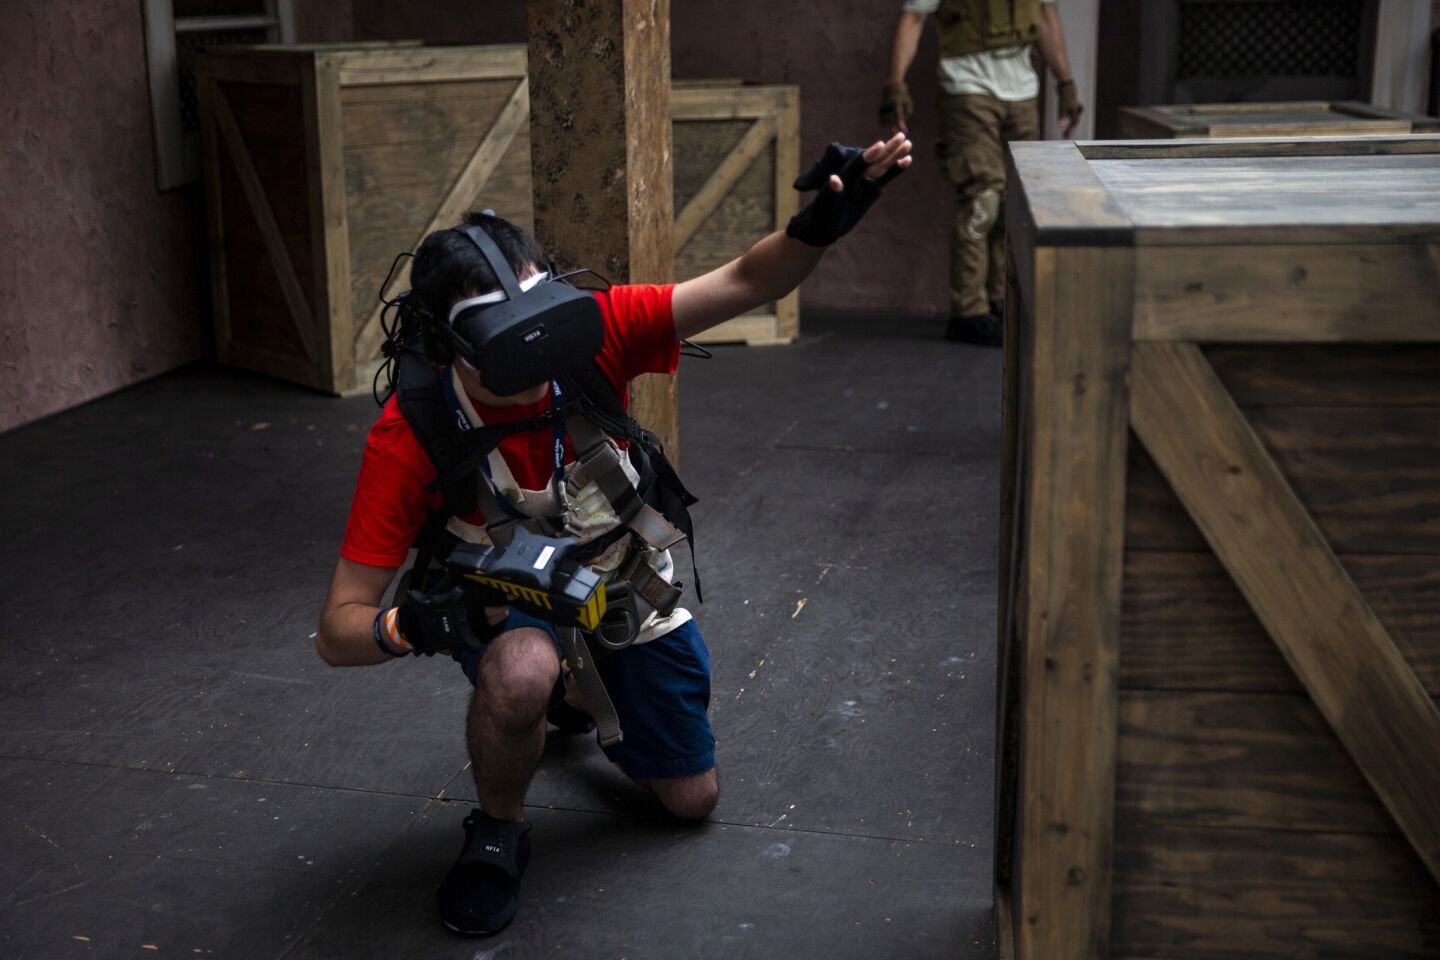 A participant in the Amazon Prime Jack Ryan activation ducks to avoid enemy combatants in a VR simulation.